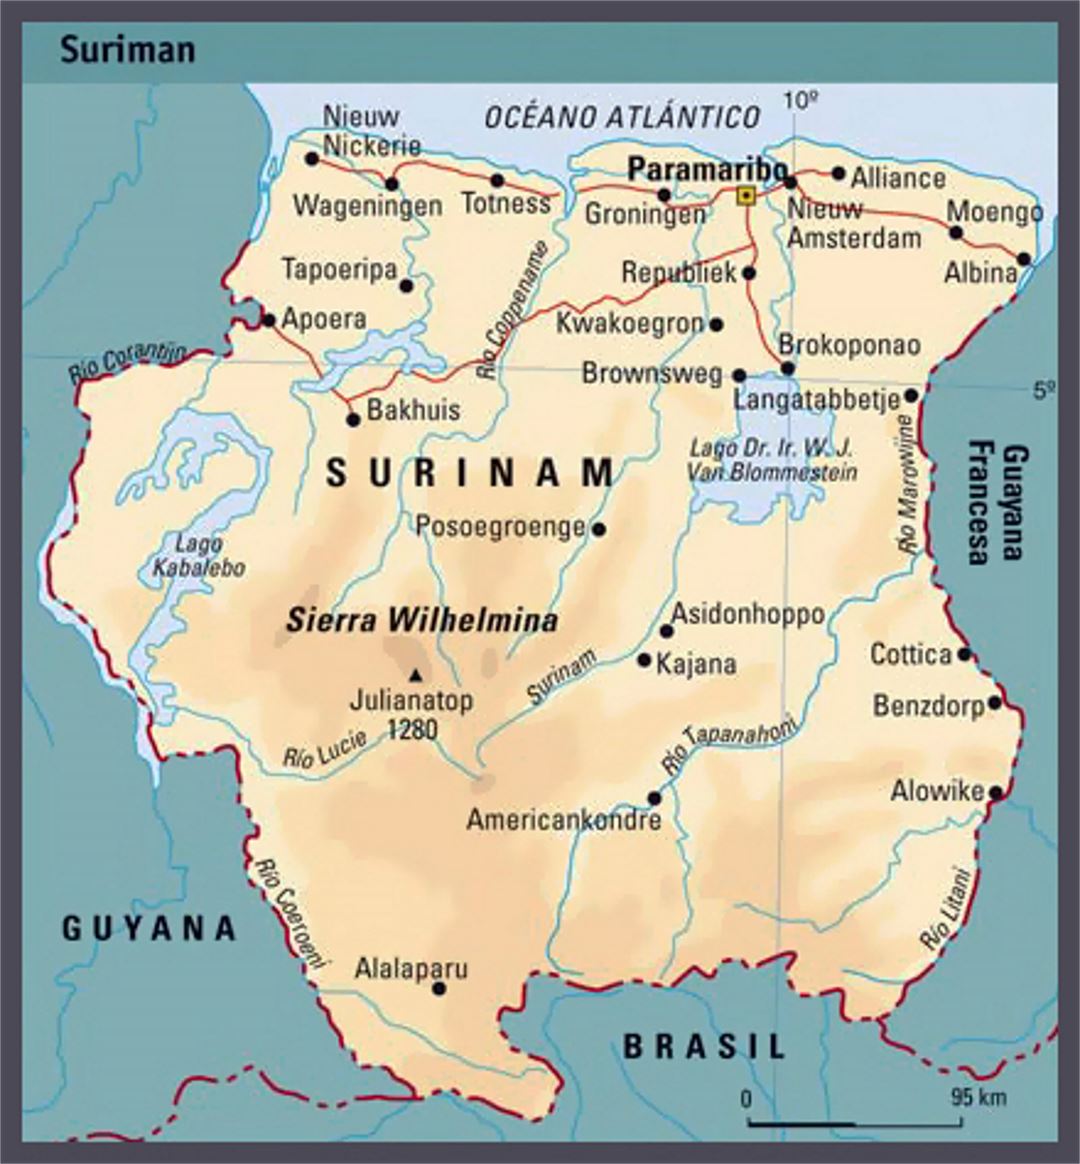 Elevation map of Suriname